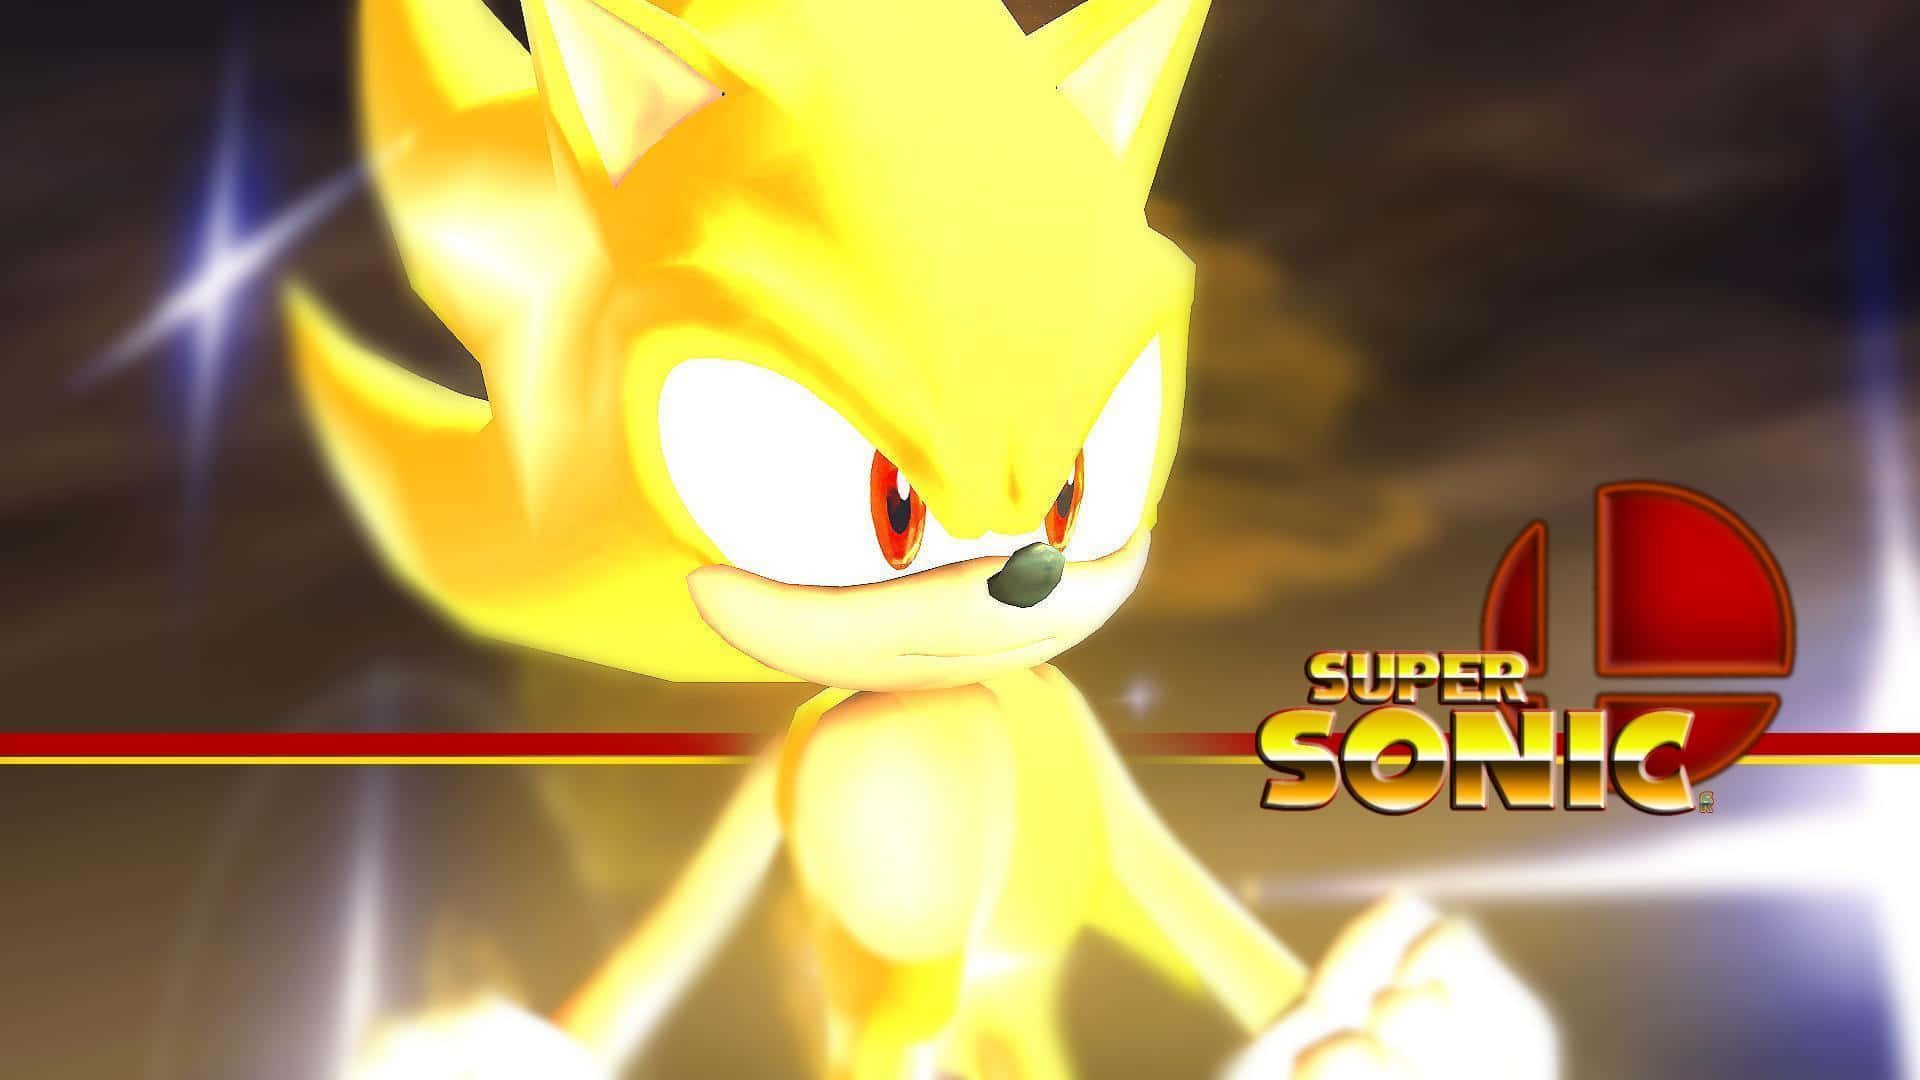 Sonic the Hedgehog wields the power of speed!